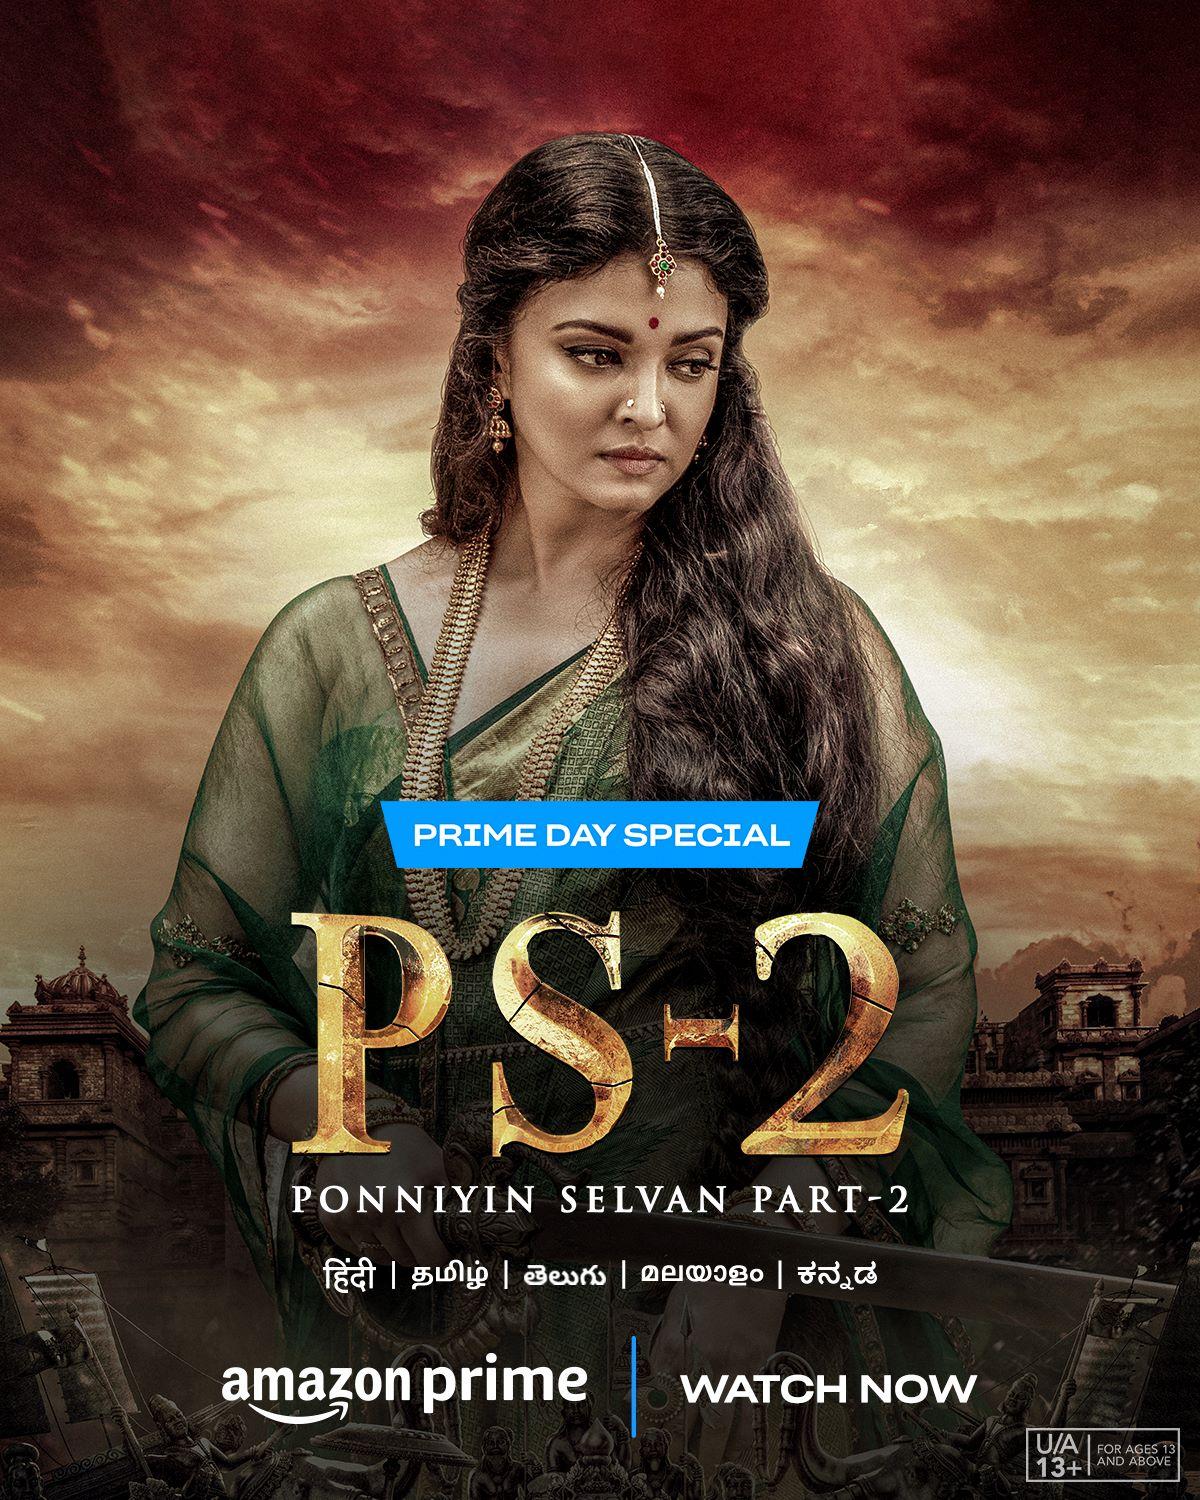 PS-2 is here to take us on an exhilarating ride of grandeur,and emotions. Don't miss out on watching one of the biggest blockbuster movies of 2023.